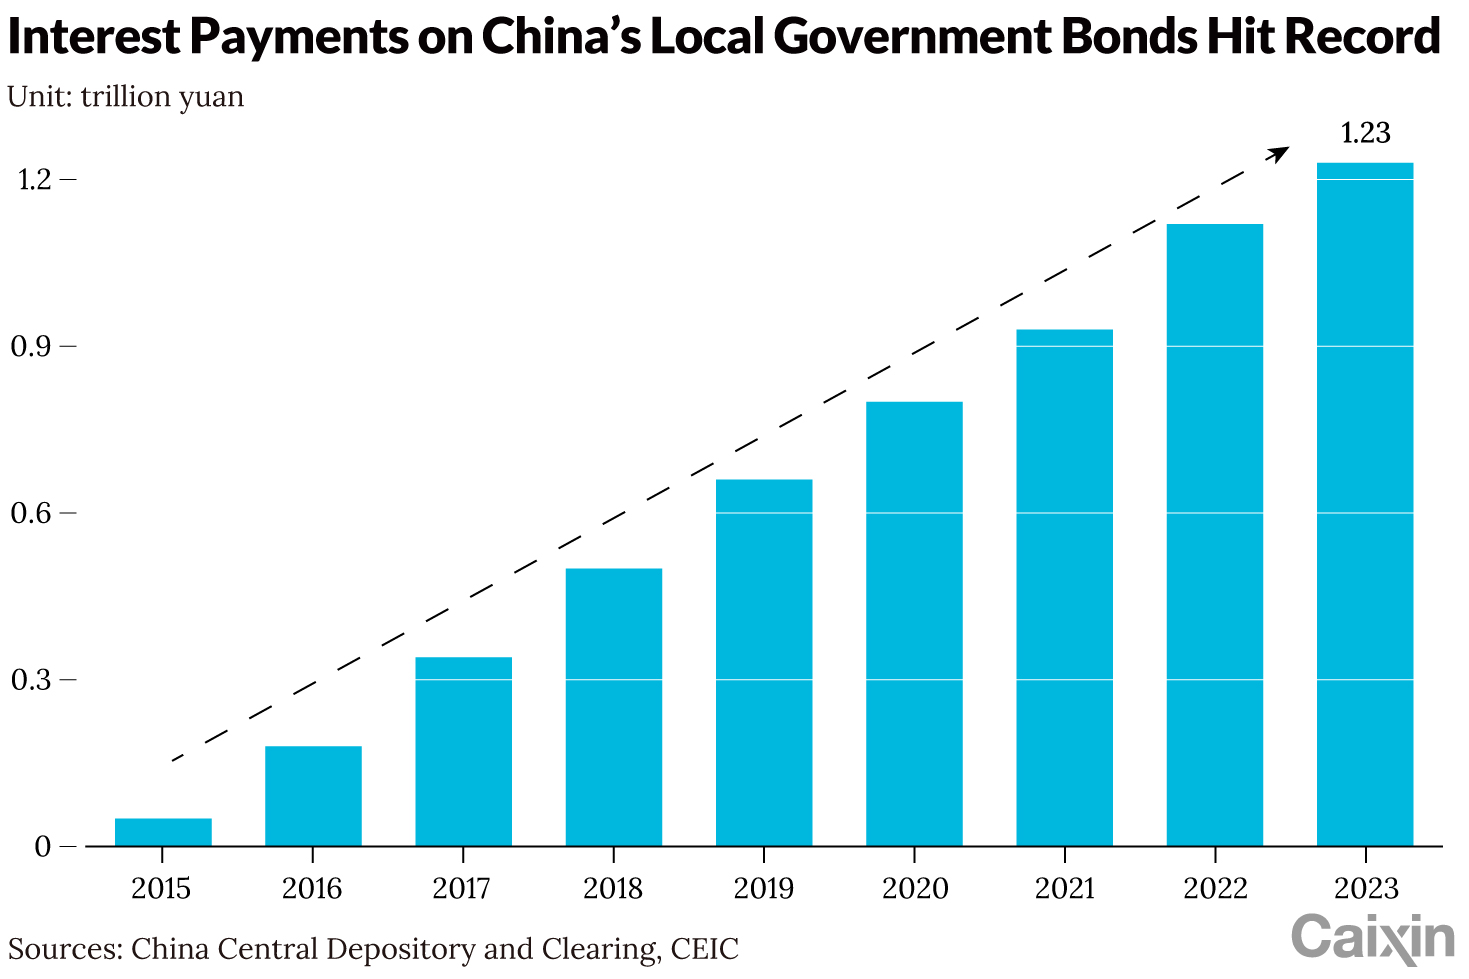 China's Local Governments Paid Record $174 Billion in Bond Interest Last Year - Caixin Global